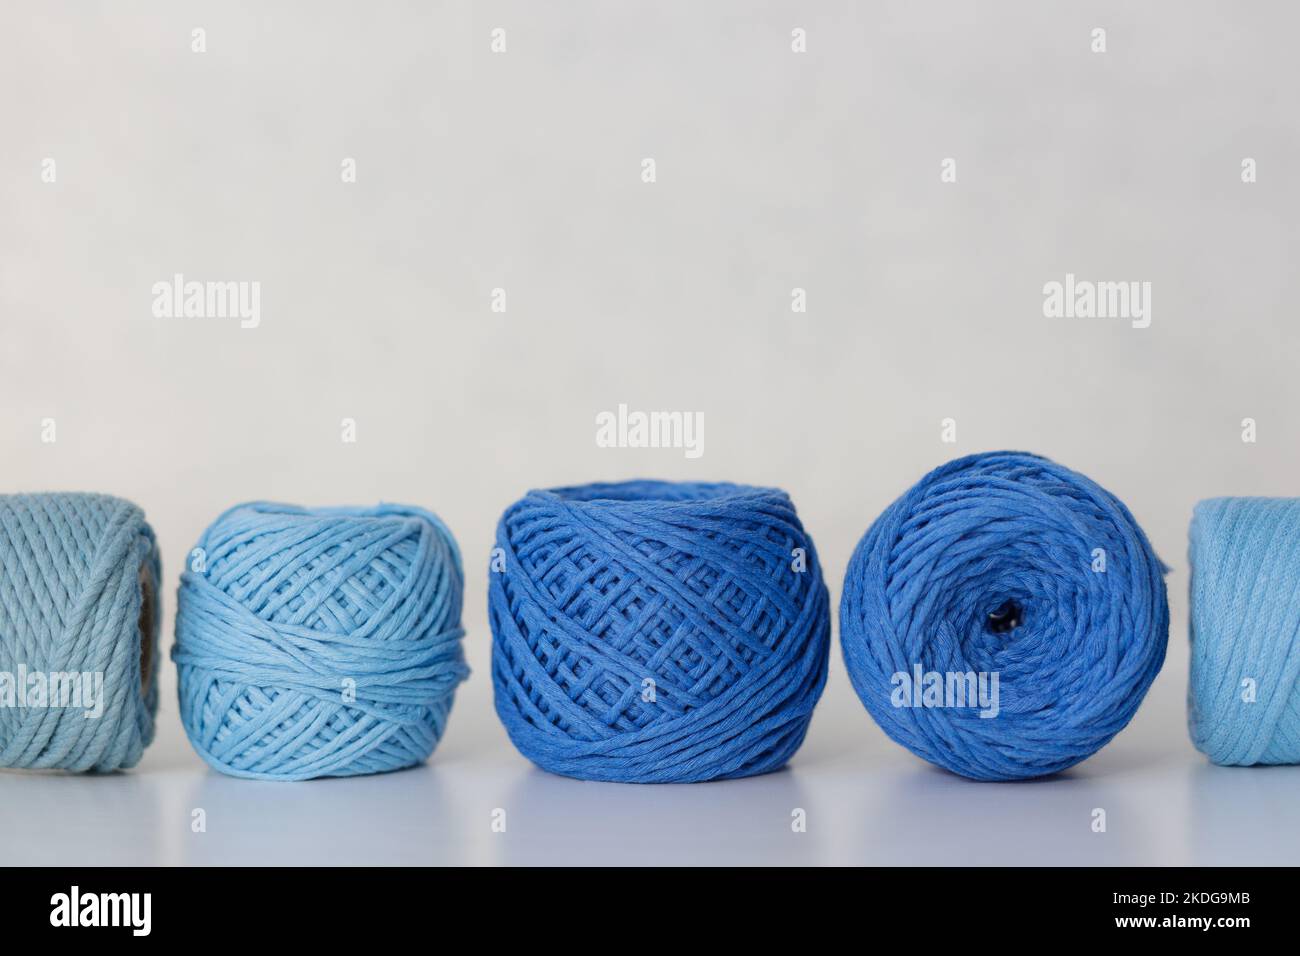 Cotton ropes and cords for needlework and macrame in blue and light blue colors Stock Photo